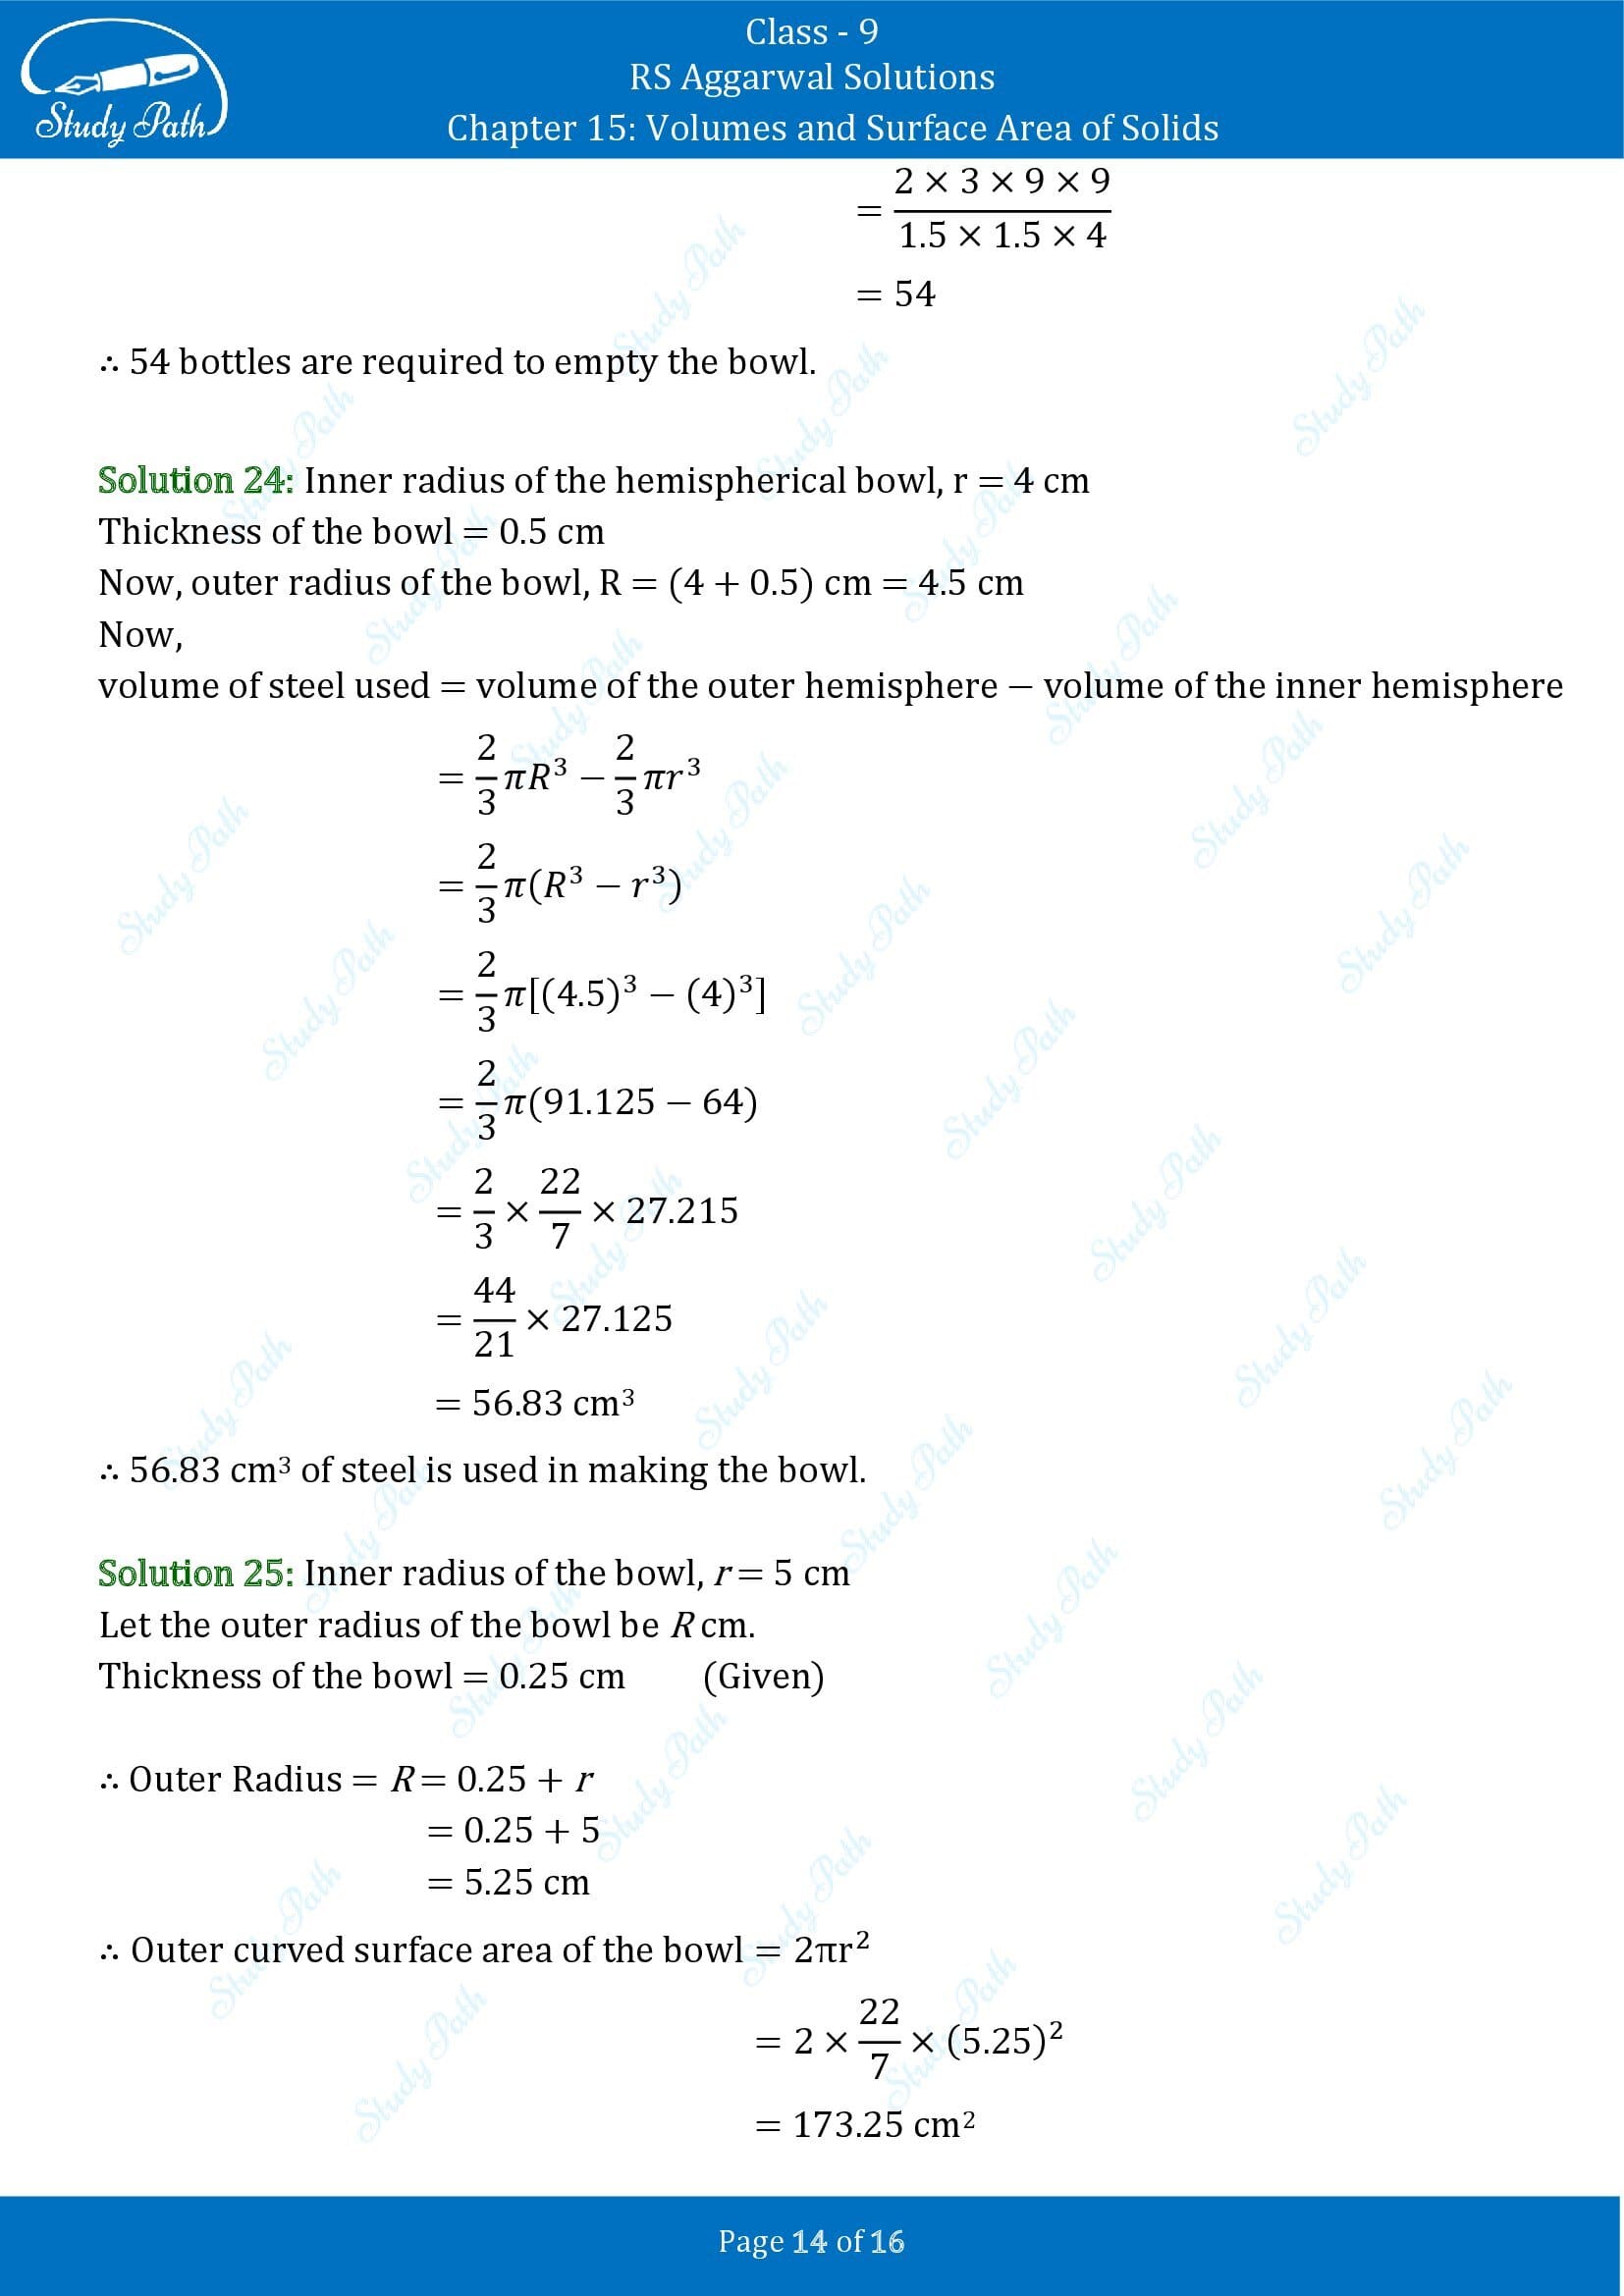 RS Aggarwal Solutions Class 9 Chapter 15 Volumes and Surface Area of Solids Exercise 15D 00014